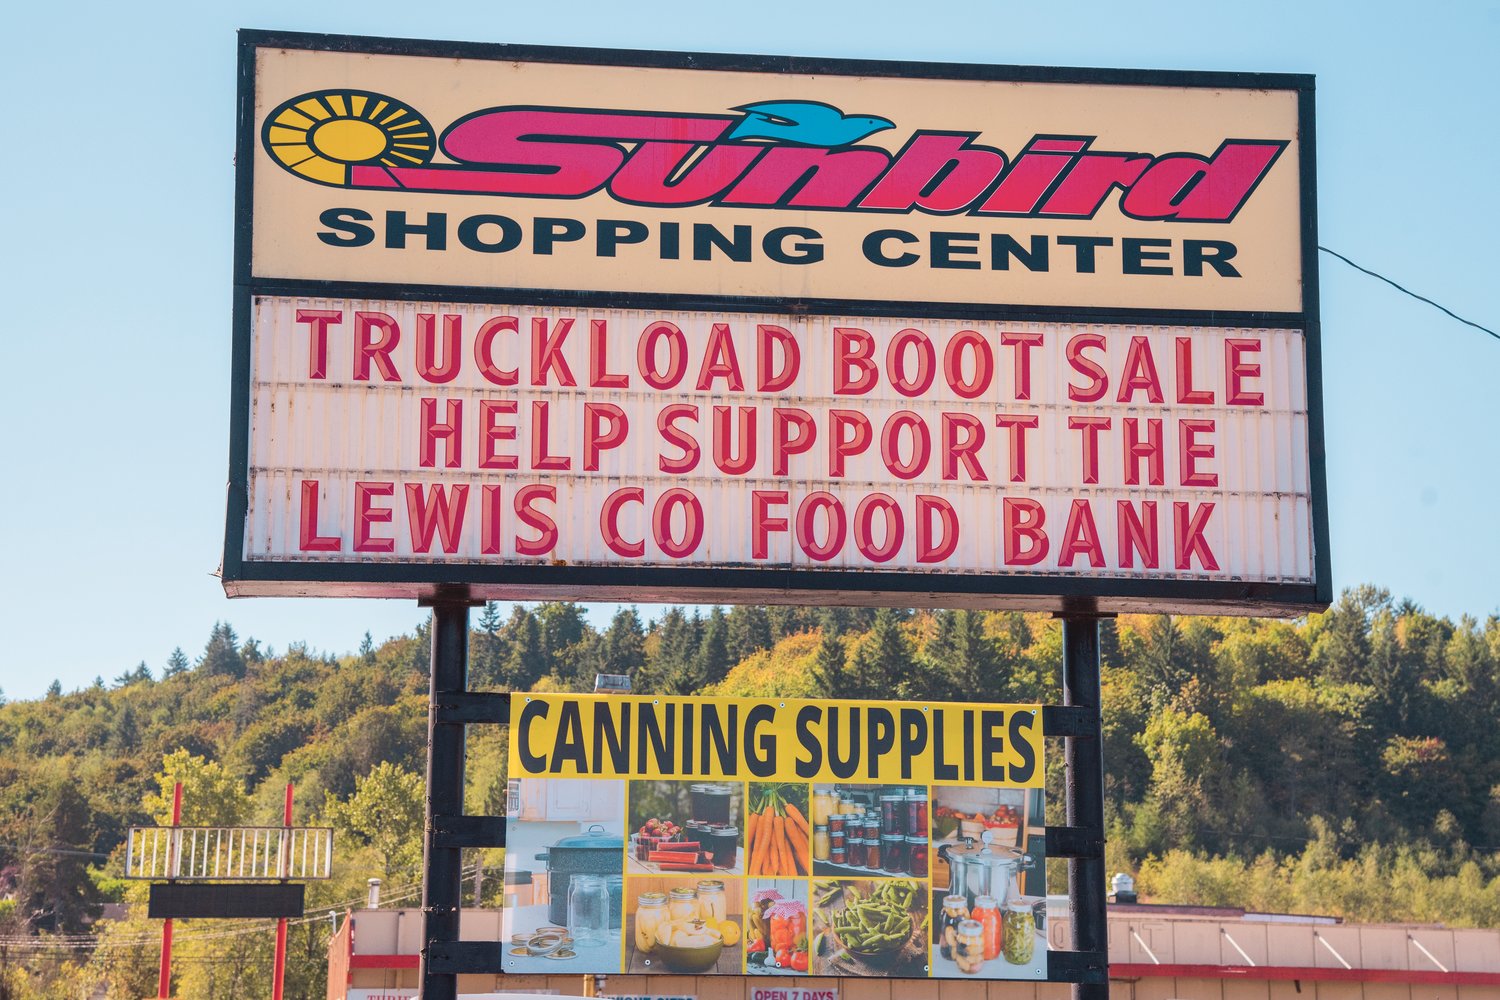 Signage for the annual "Truckload Boot Sale" is displayed at the Sunbird Shopping Center while the business donates $5 of every Georgia Boot sale to the Lewis County Food Bank.